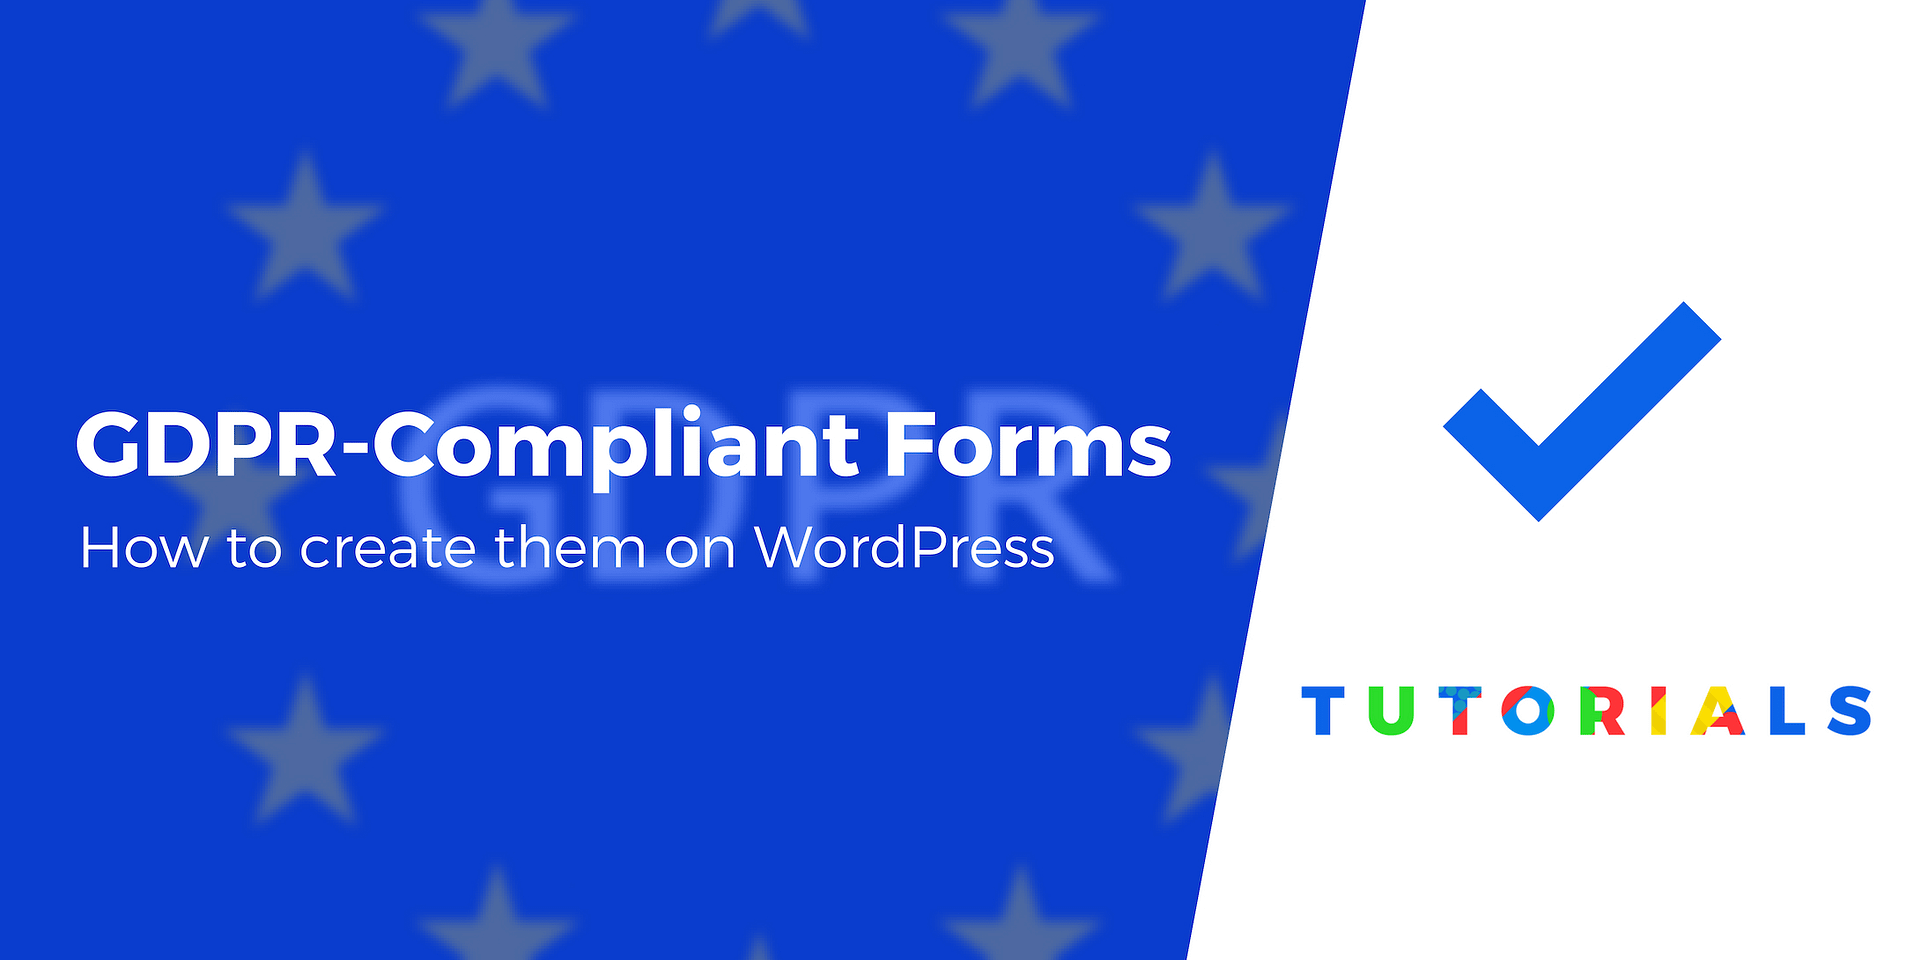 How to Create GDPR-Compliant Forms on Your WordPress Site